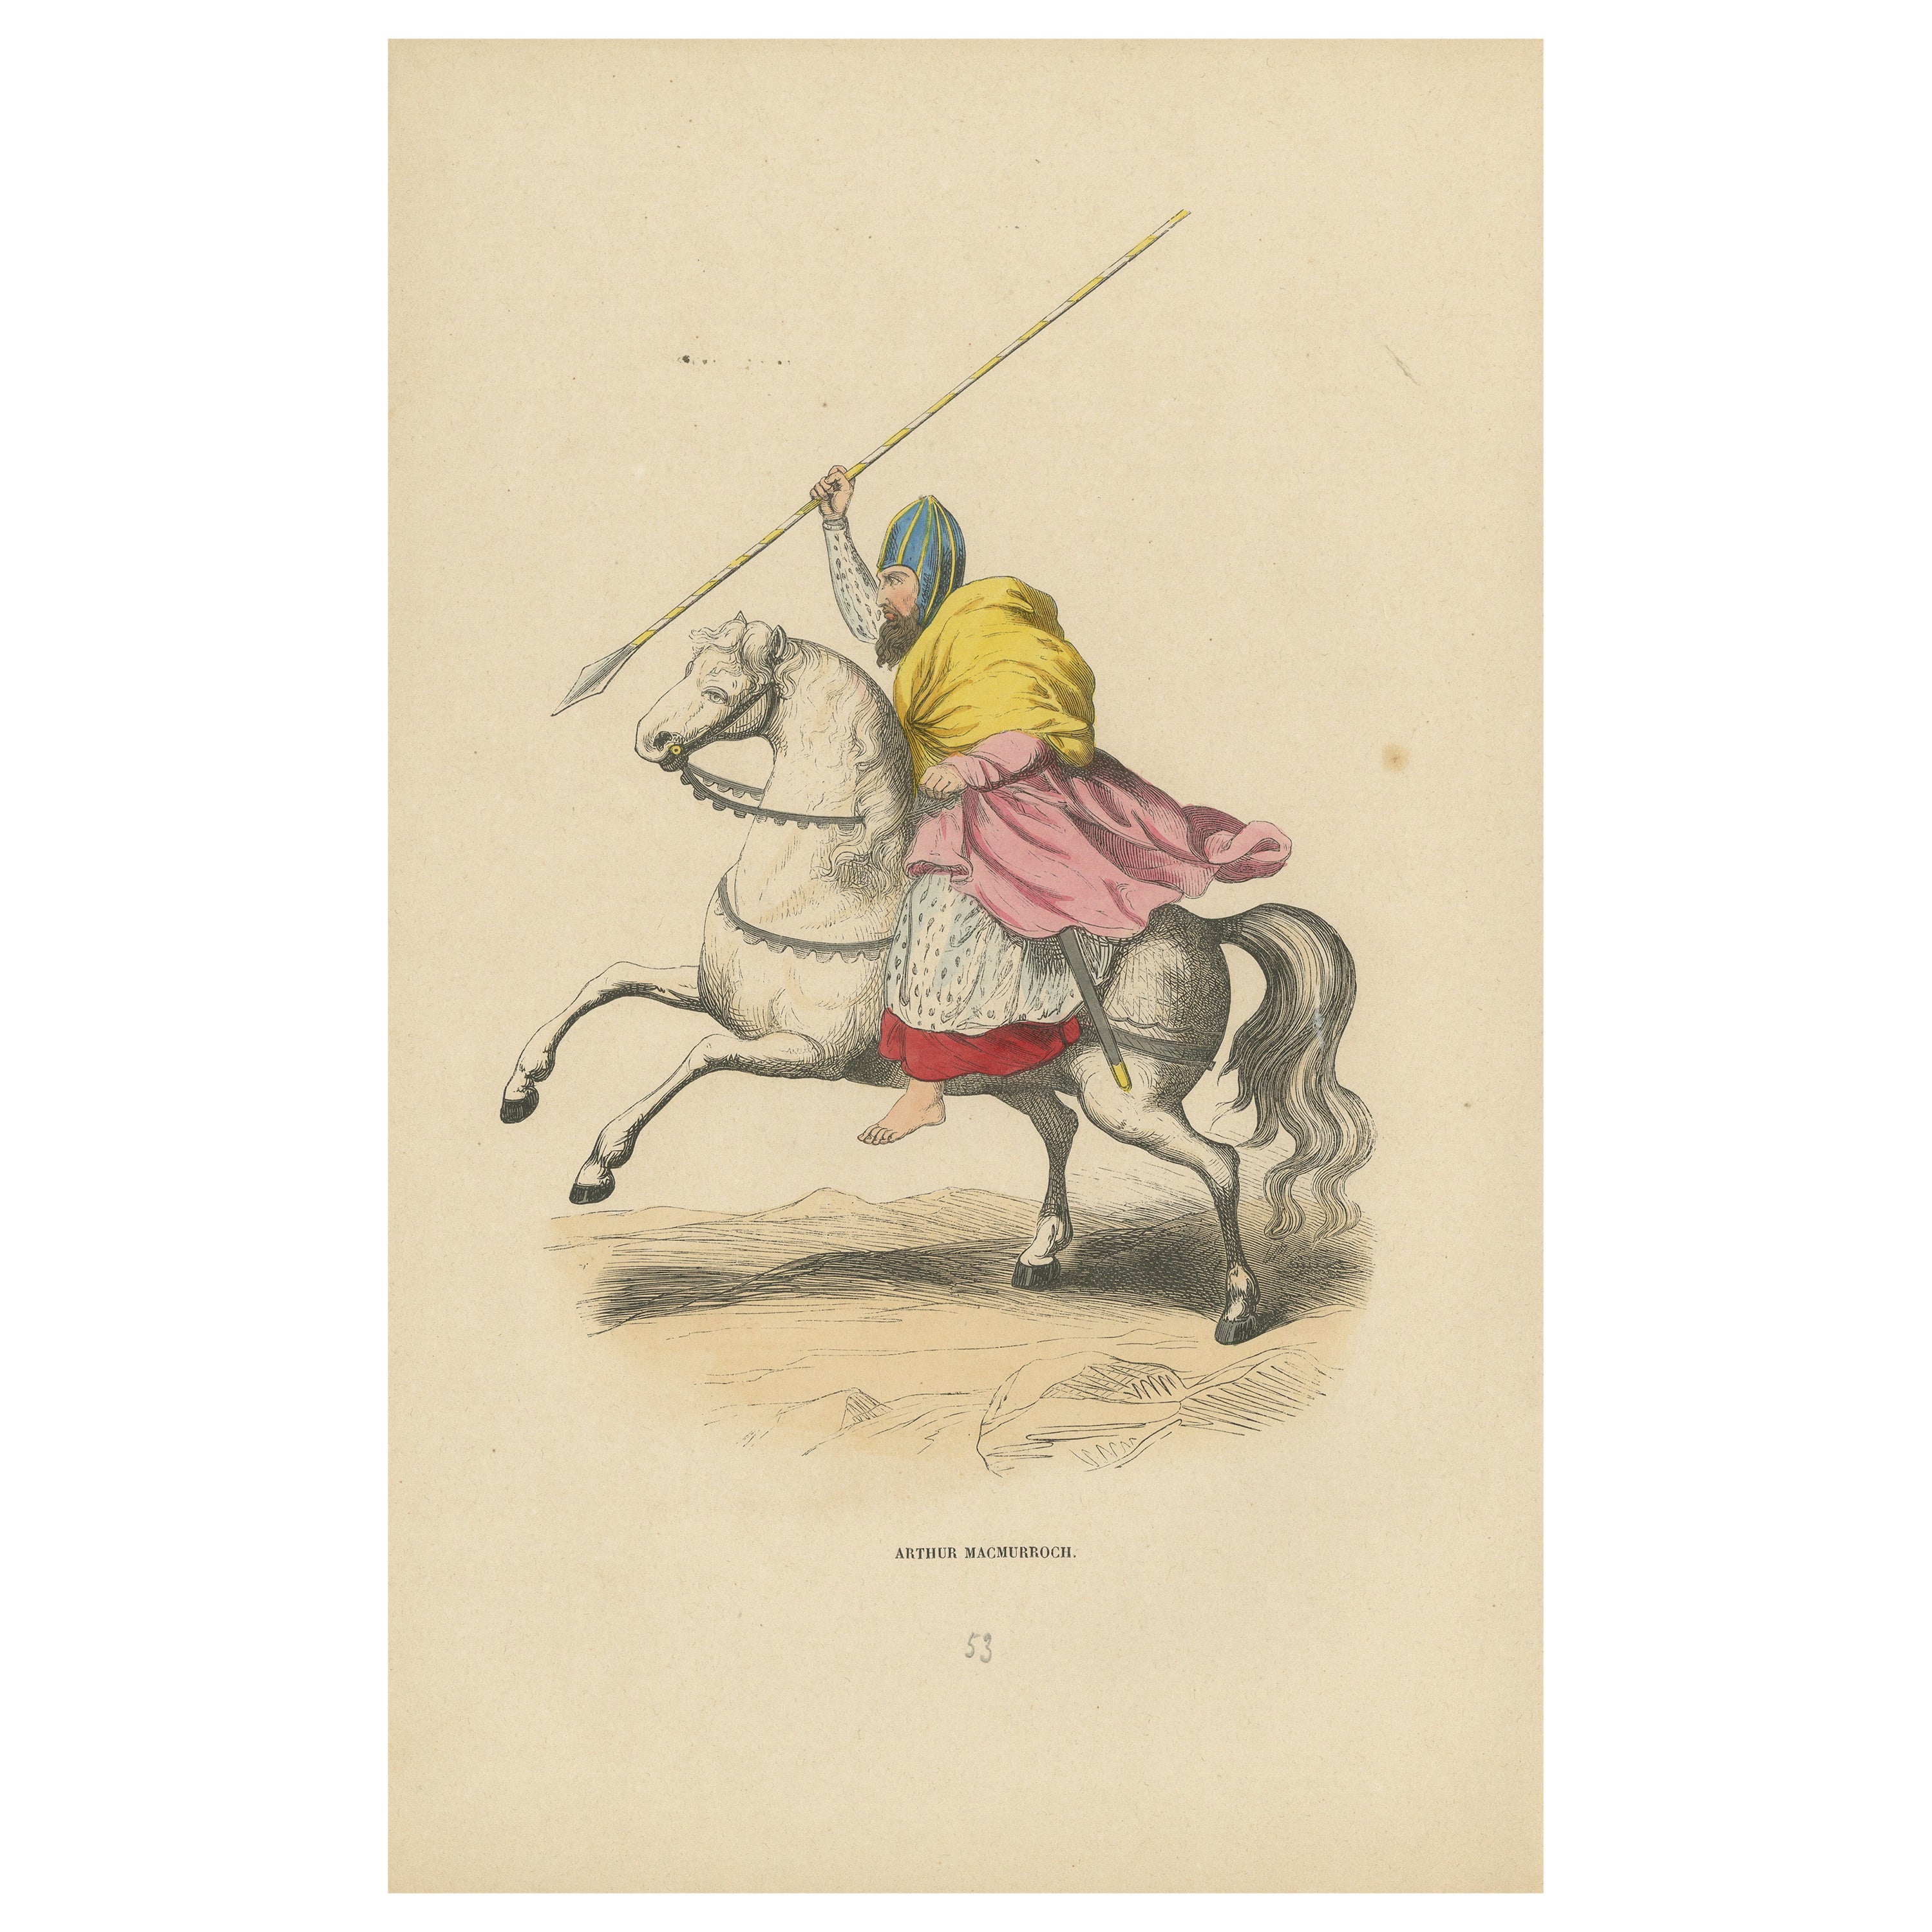 Arthur MacMurrough: The Irish Charging Chieftain, Lithograph Published in 1847